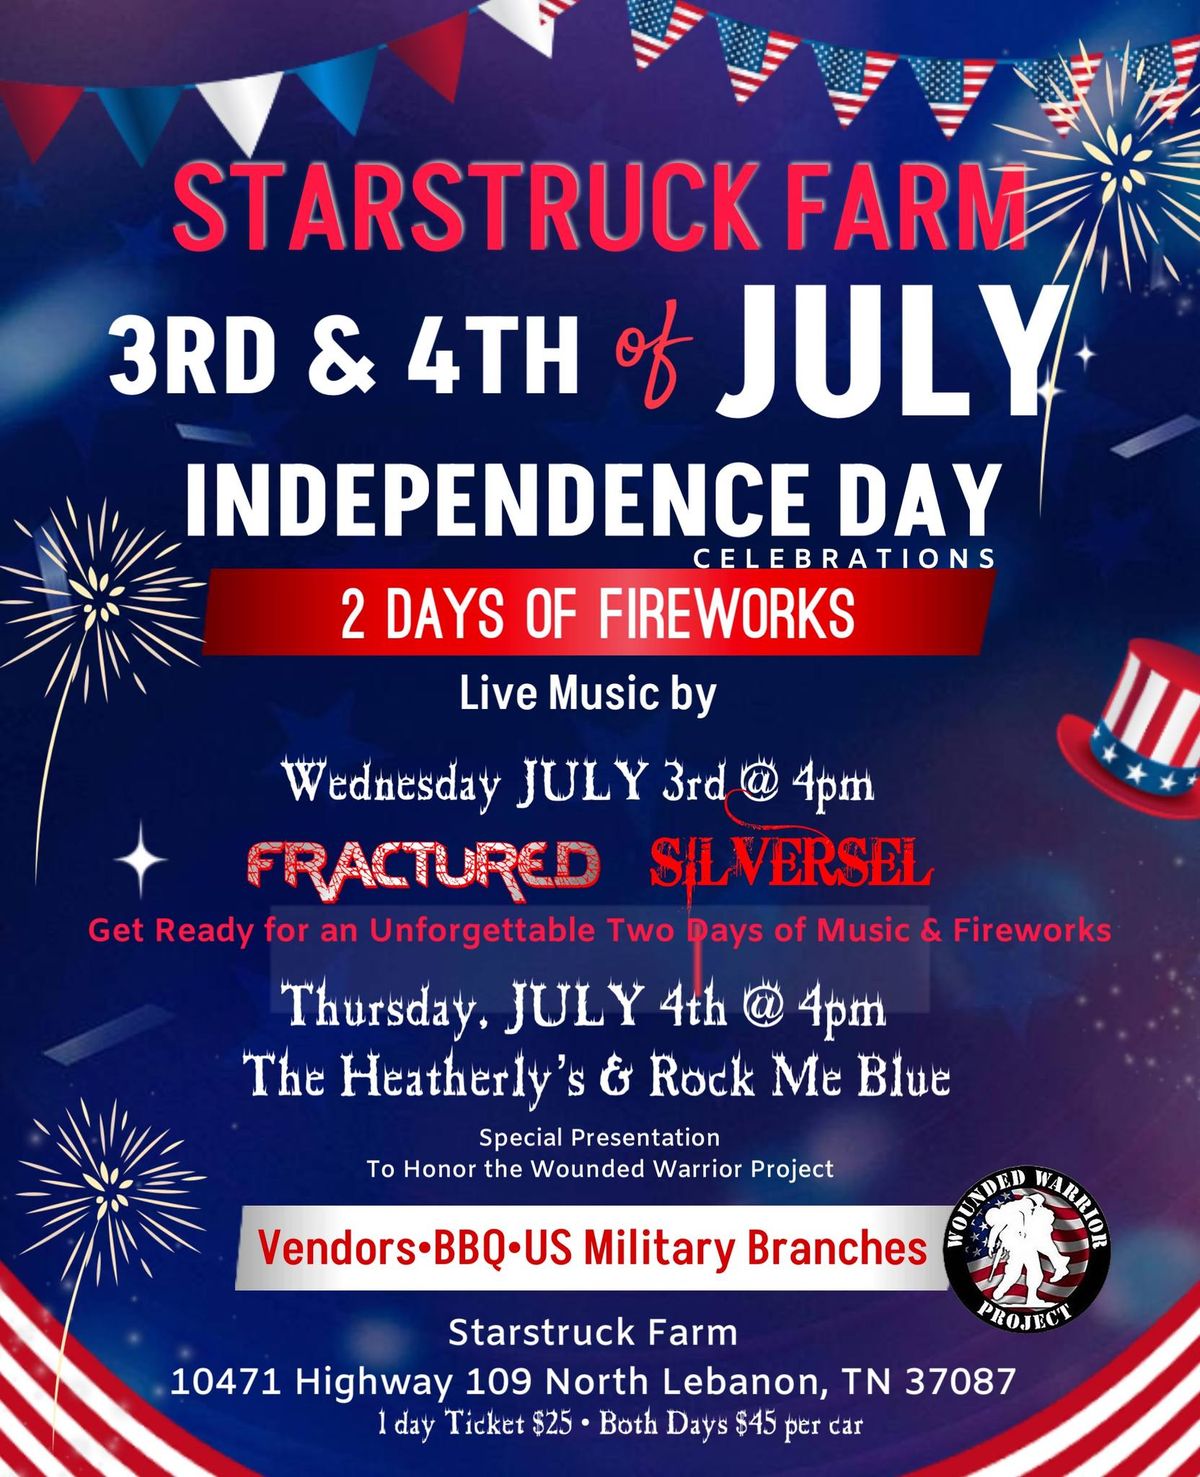 Independence Day Extravaganza - A Starstruck Farm 2 Day Event!